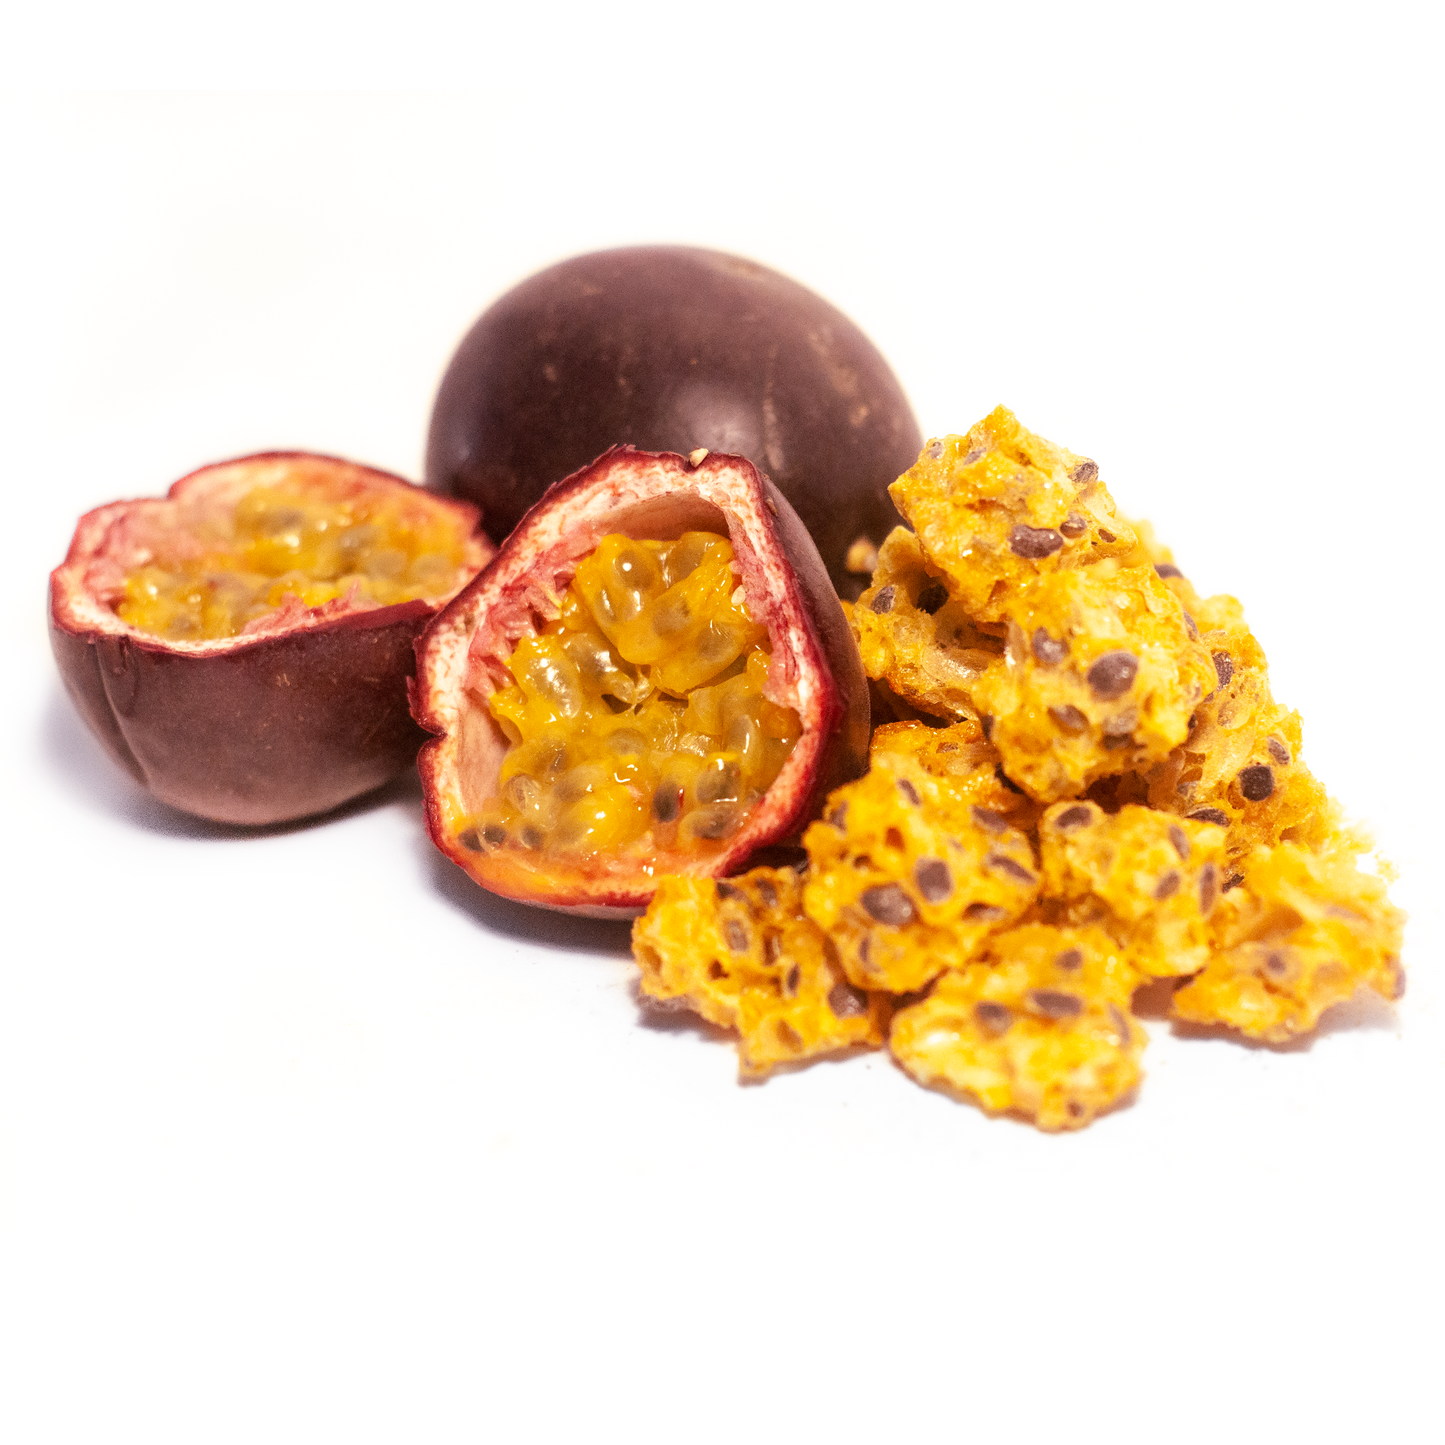 Freeze Dried Passion Fruit Snack by The Rotten Fruit Box